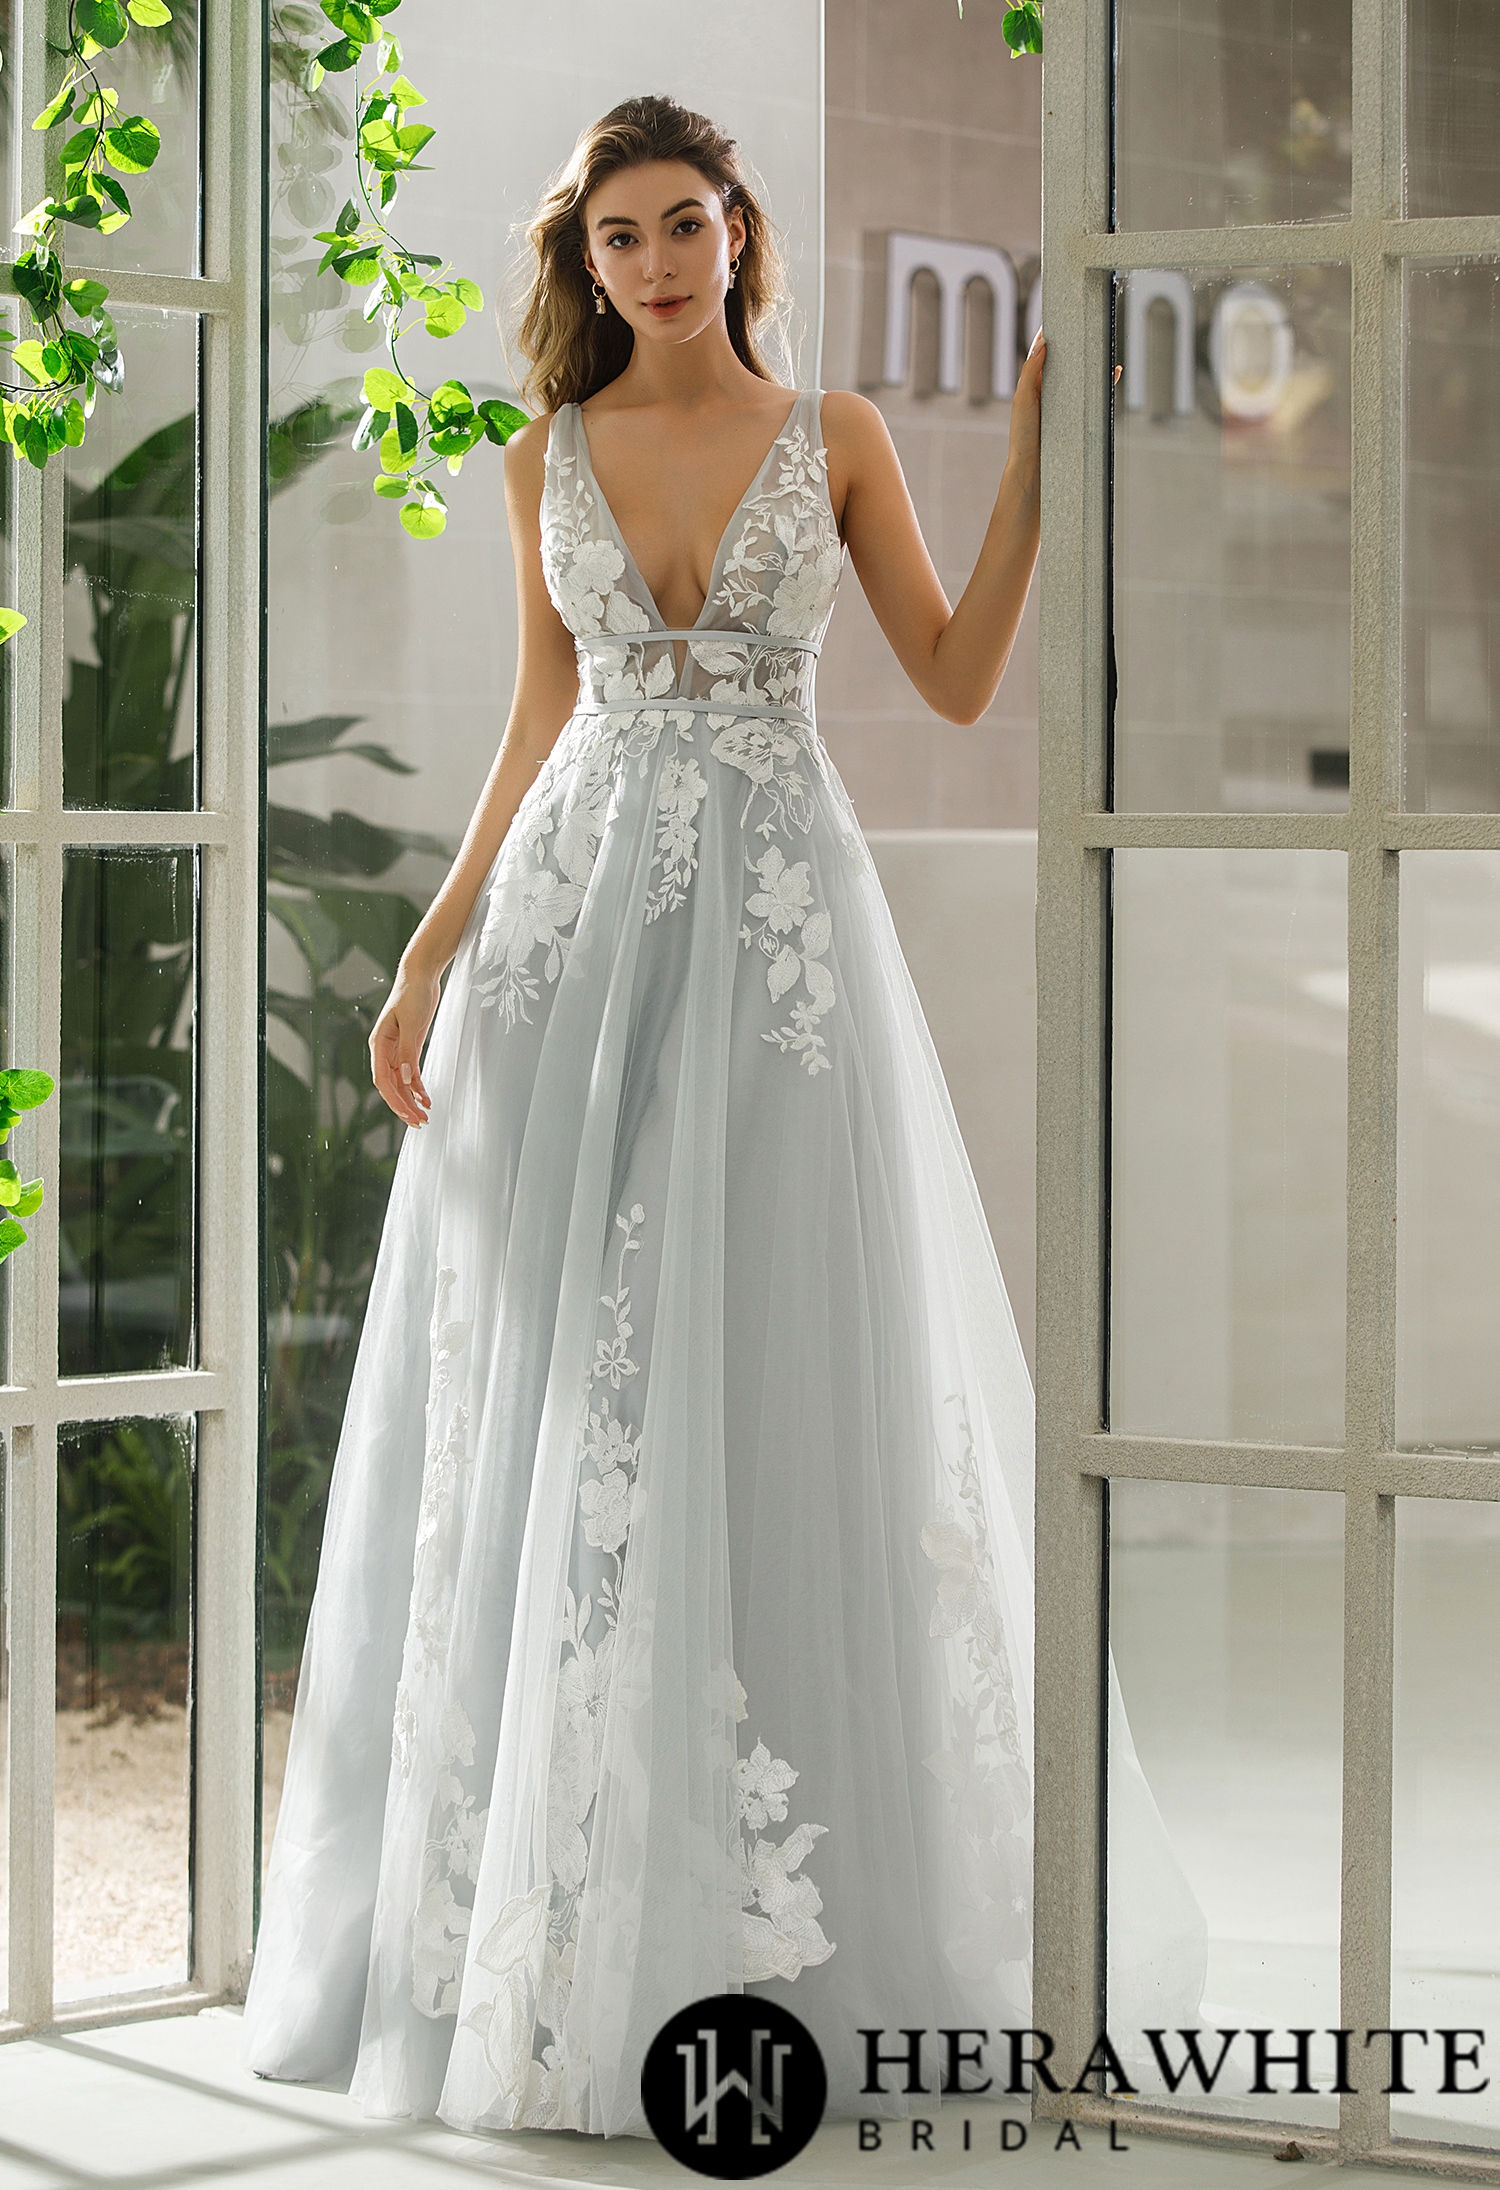 In Stock/ Plunging V-neck Wedding Dress With Floral Motifs